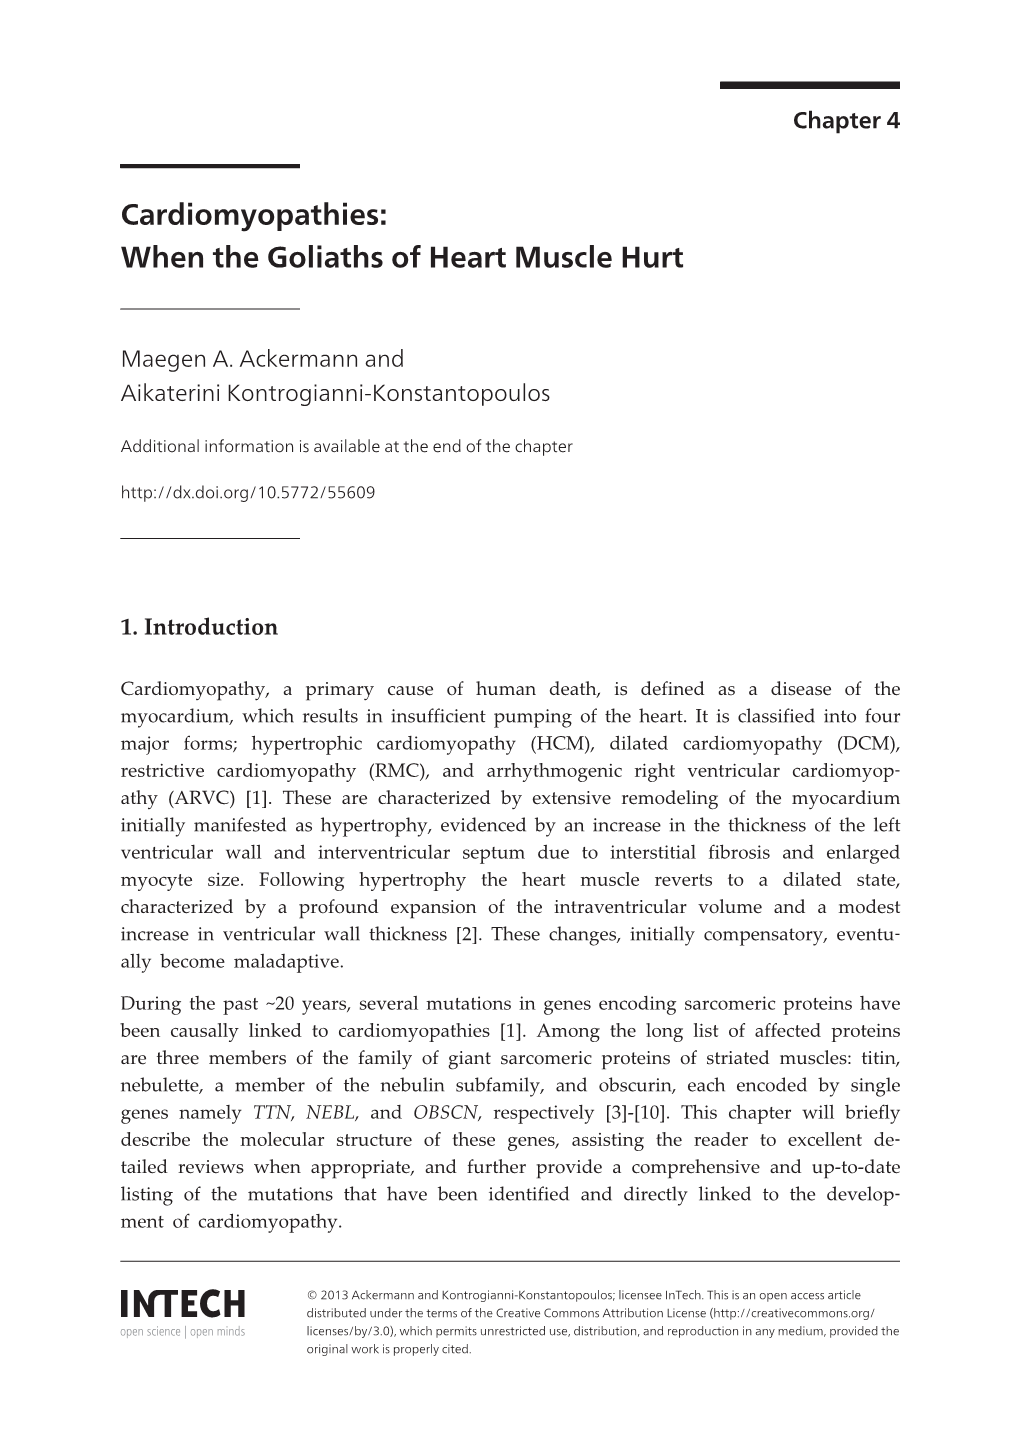 Cardiomyopathies: When the Goliaths of Heart Muscle Hurt